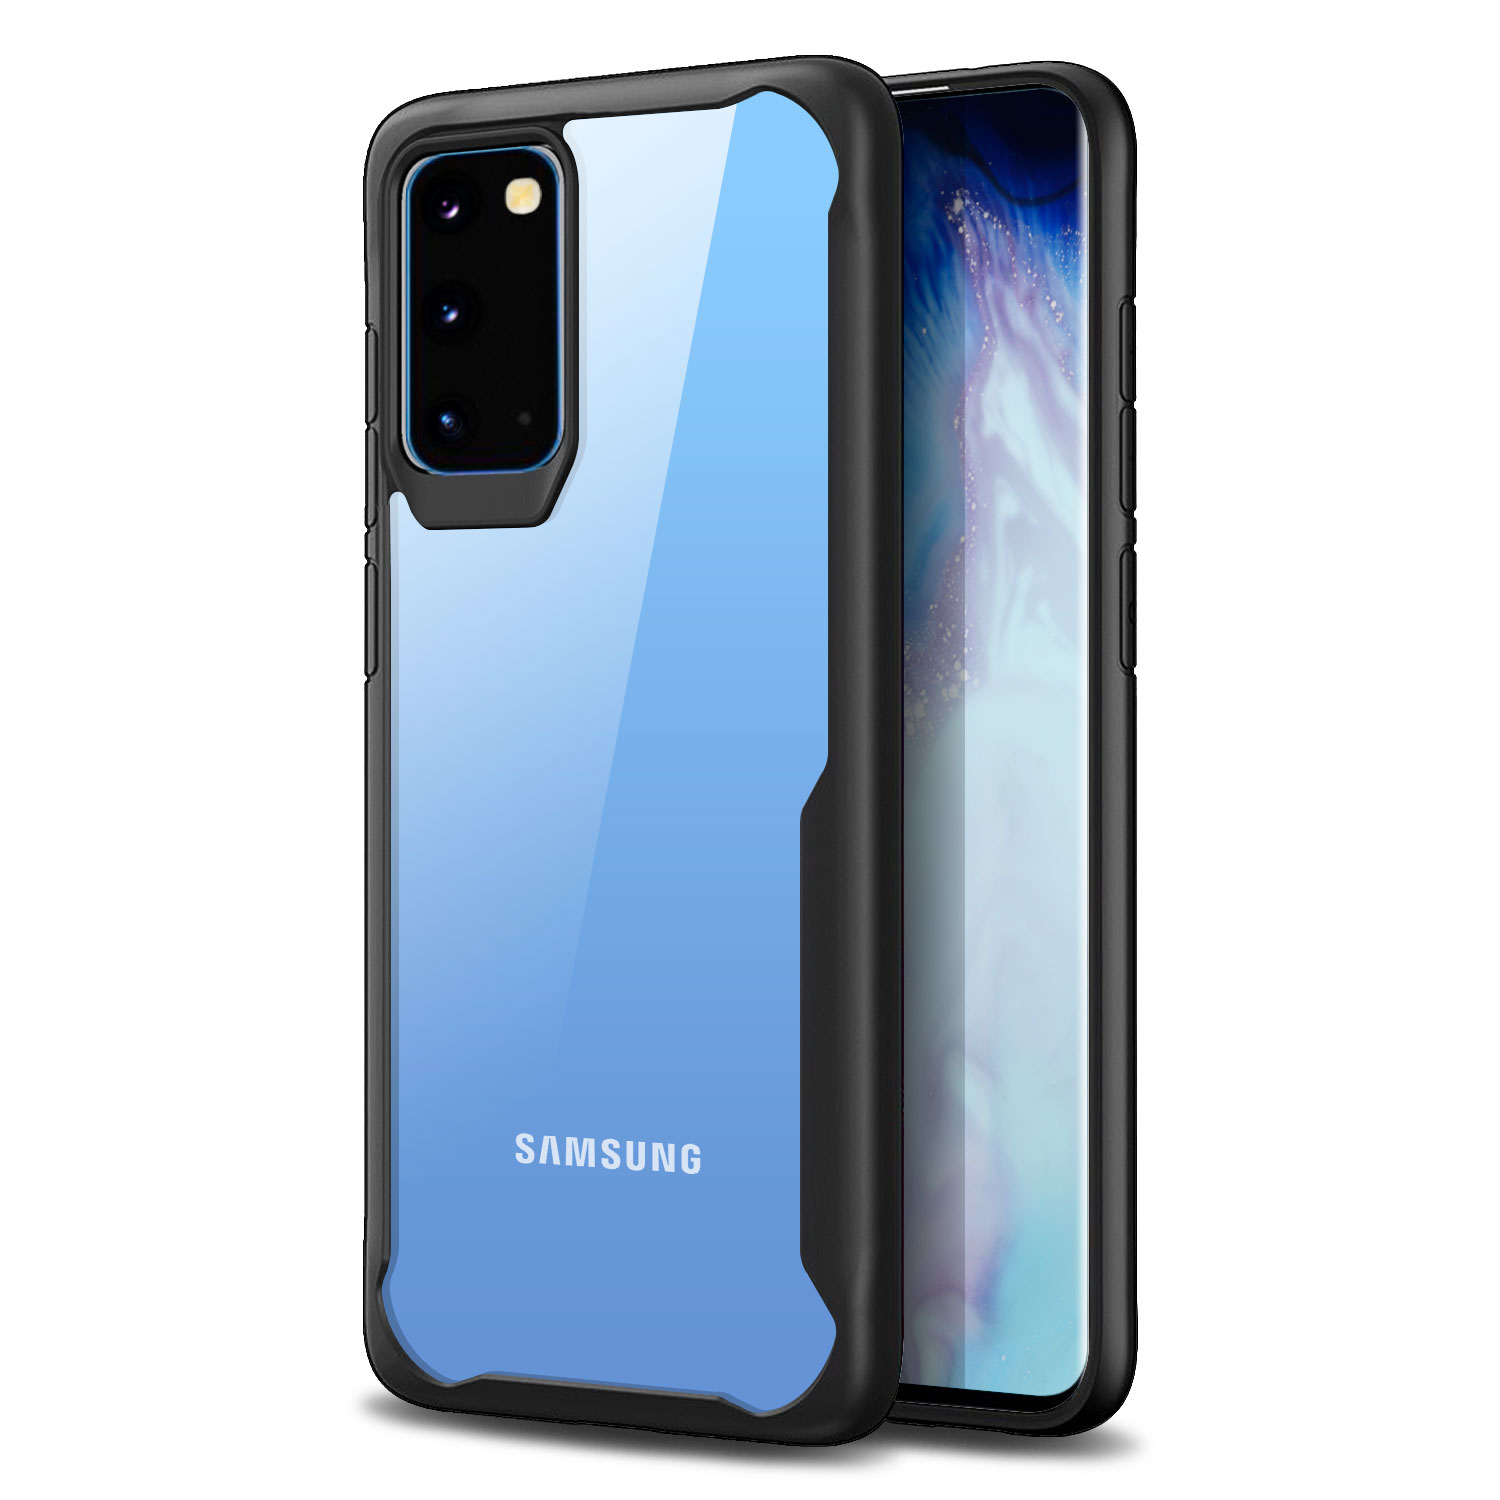 These various third-party Samsung Galaxy S20 cases can now be